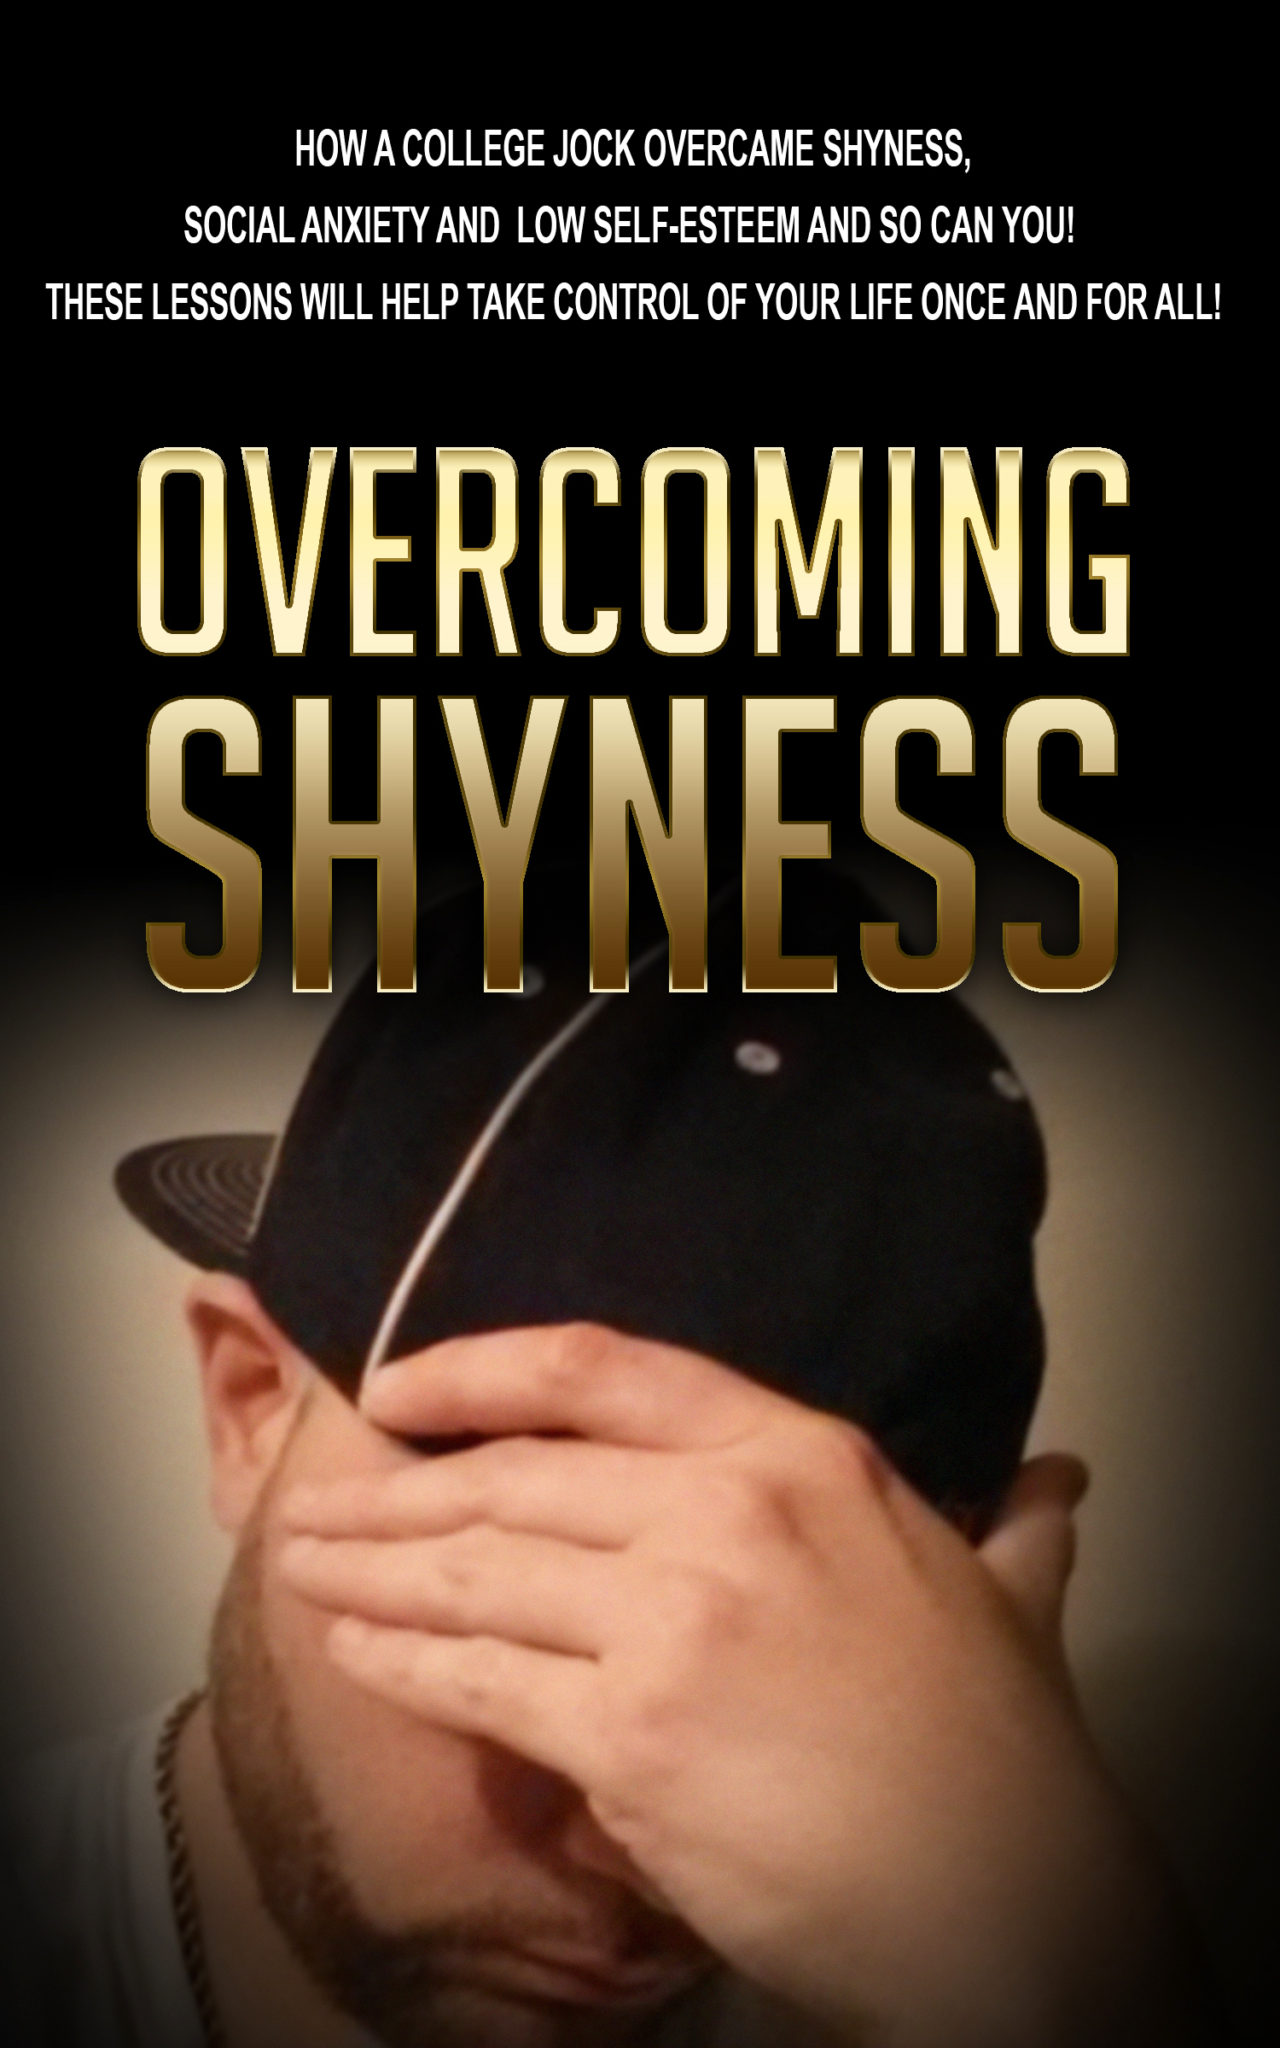 OVERCOMING SHYNESS: HOW A COLLEGE JOCK OVERCAME SHYNESS, SOCIAL ANXIETY AND LOW SELF-ESTEEM AND SO CAN YOU! THESE LESSONS WILL HELP TAKE CONTROL OF YOUR  LIFE ONCE AND FOR ALL by Sione Michelson